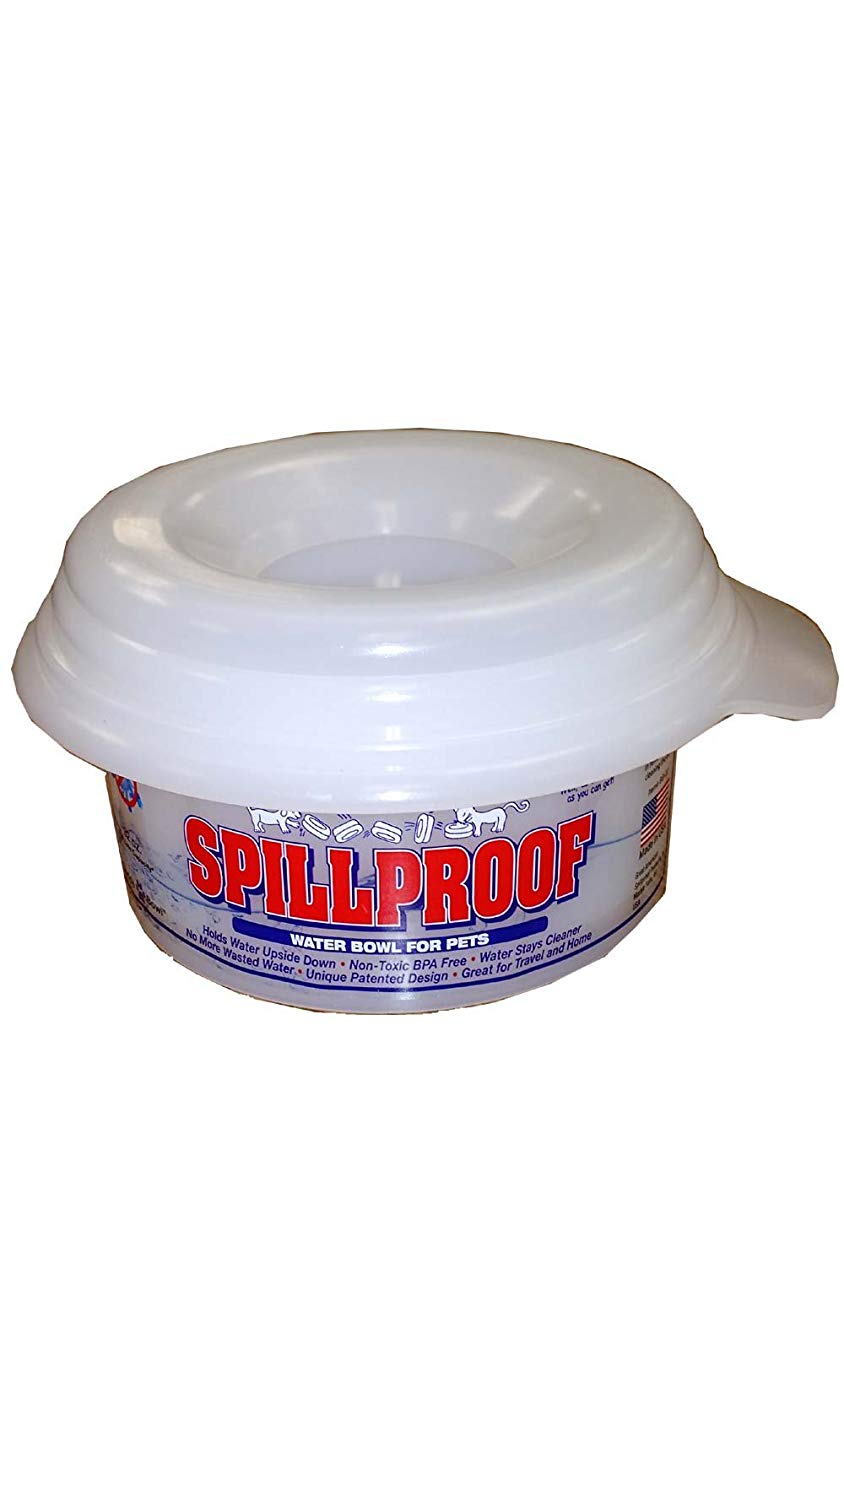 Buddy Bowl, Spill-Proof Water Bowl